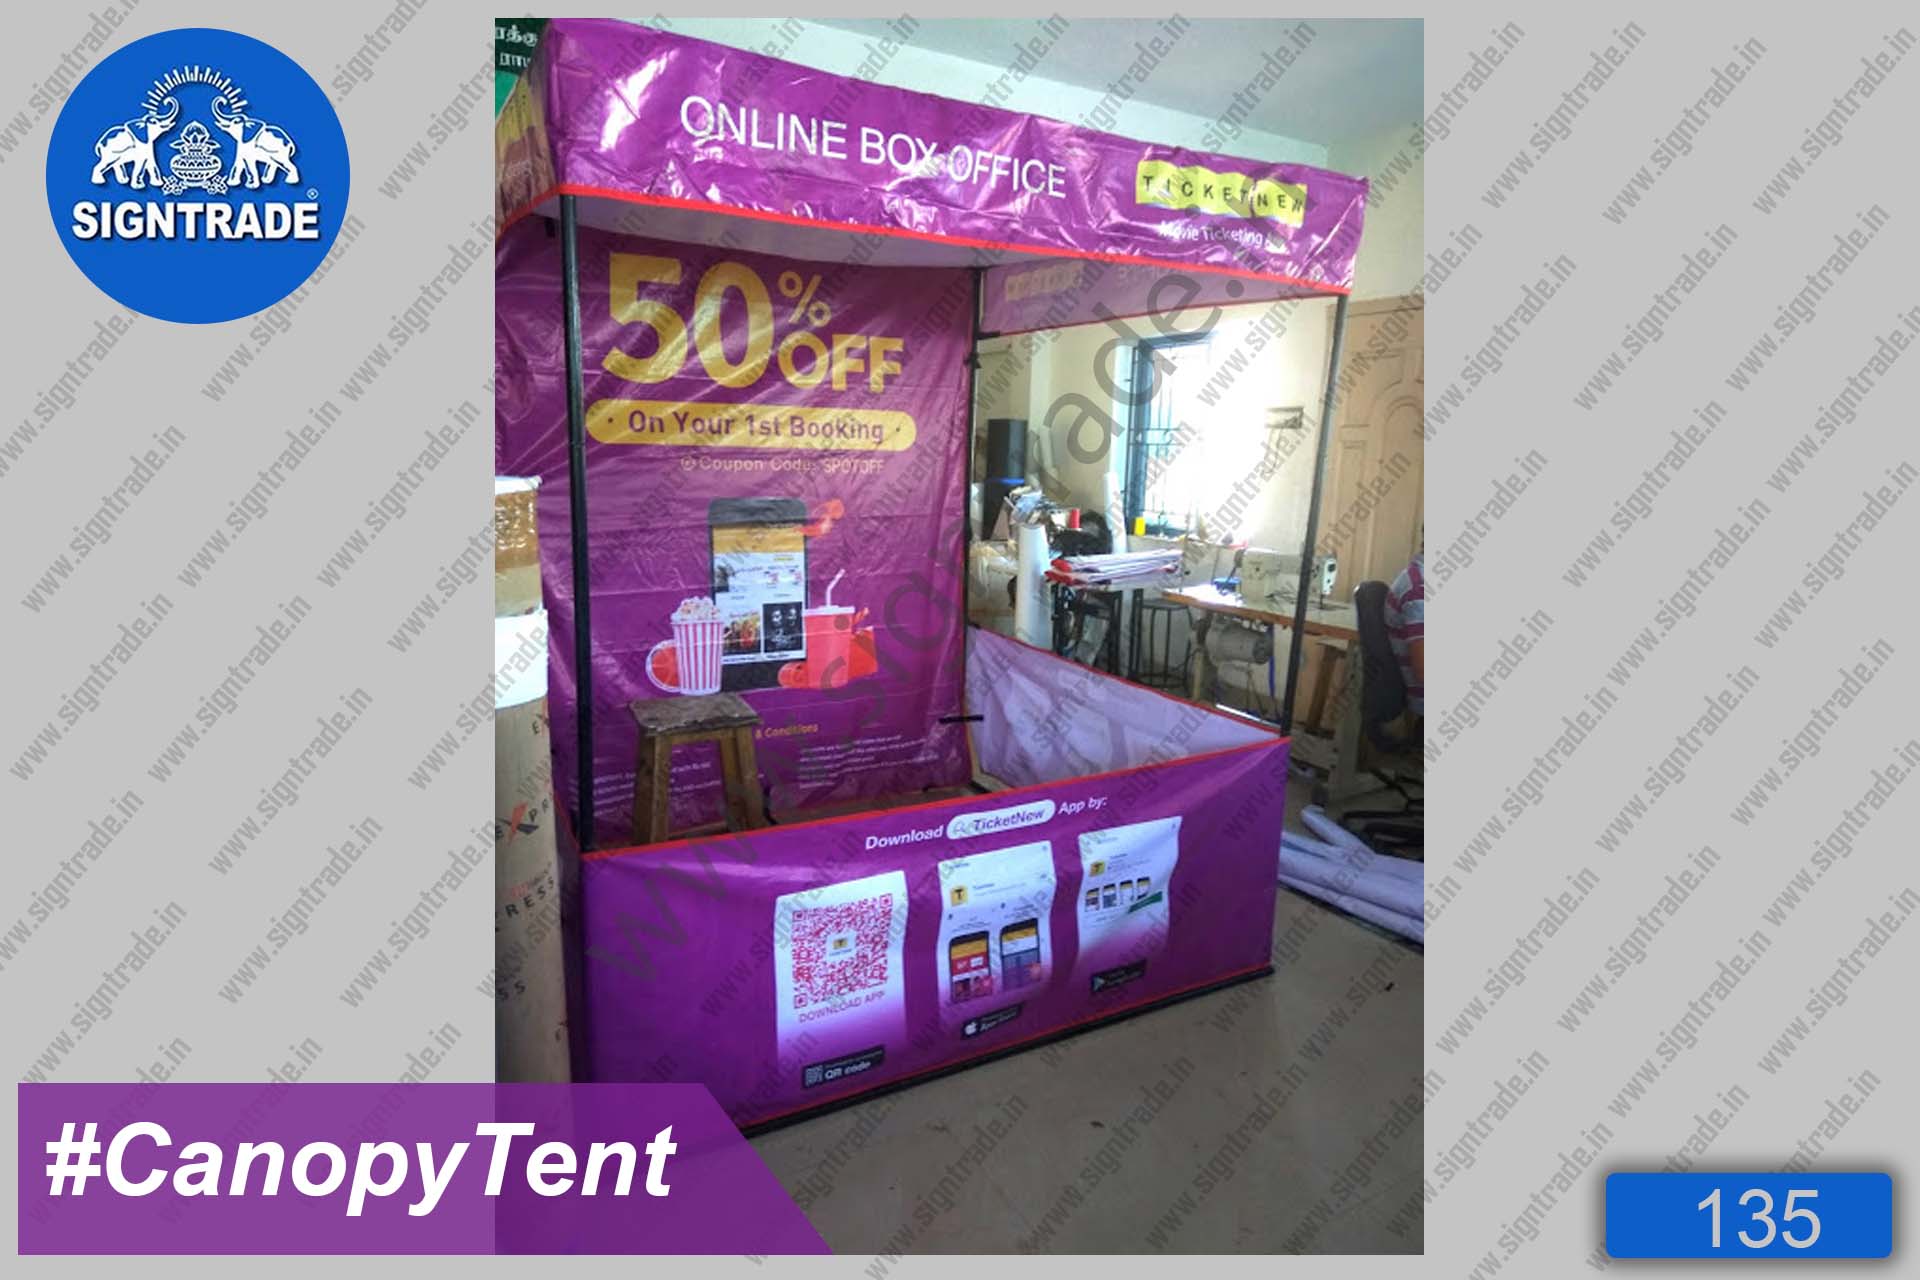 Online Box Office - Canopy Tent